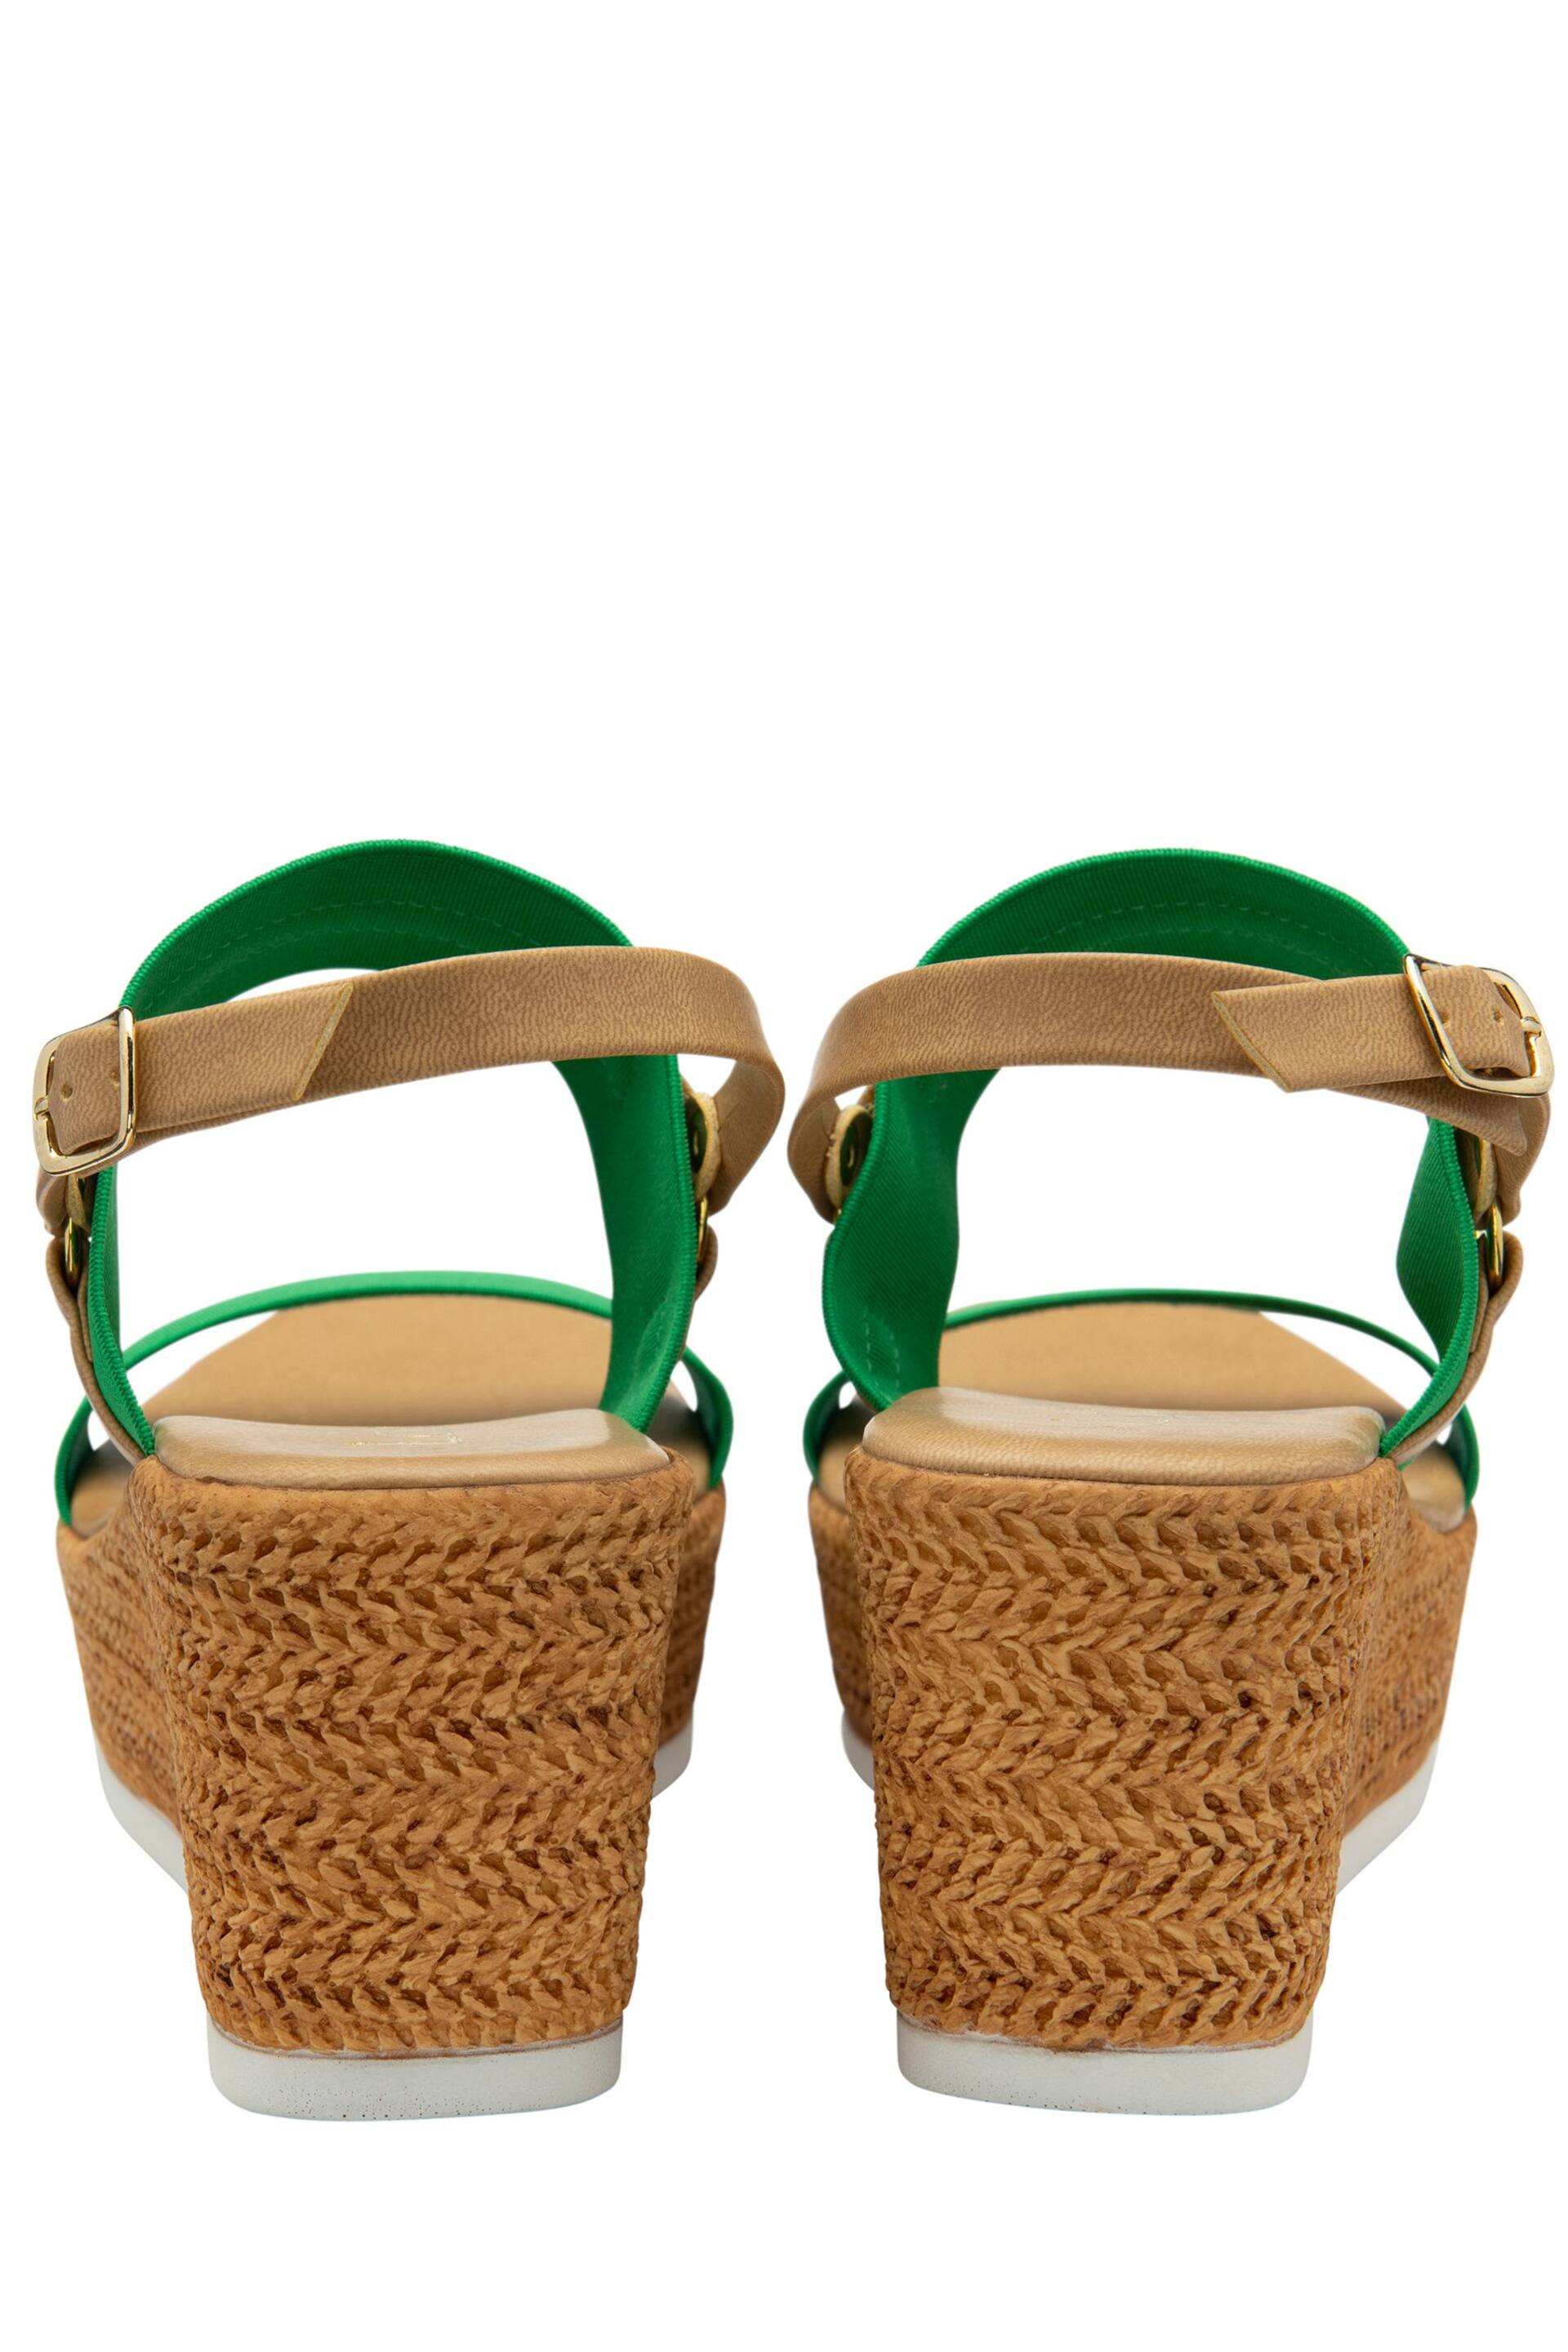 Lotus Green Open-Toe Wedge Sandals - Image 3 of 4